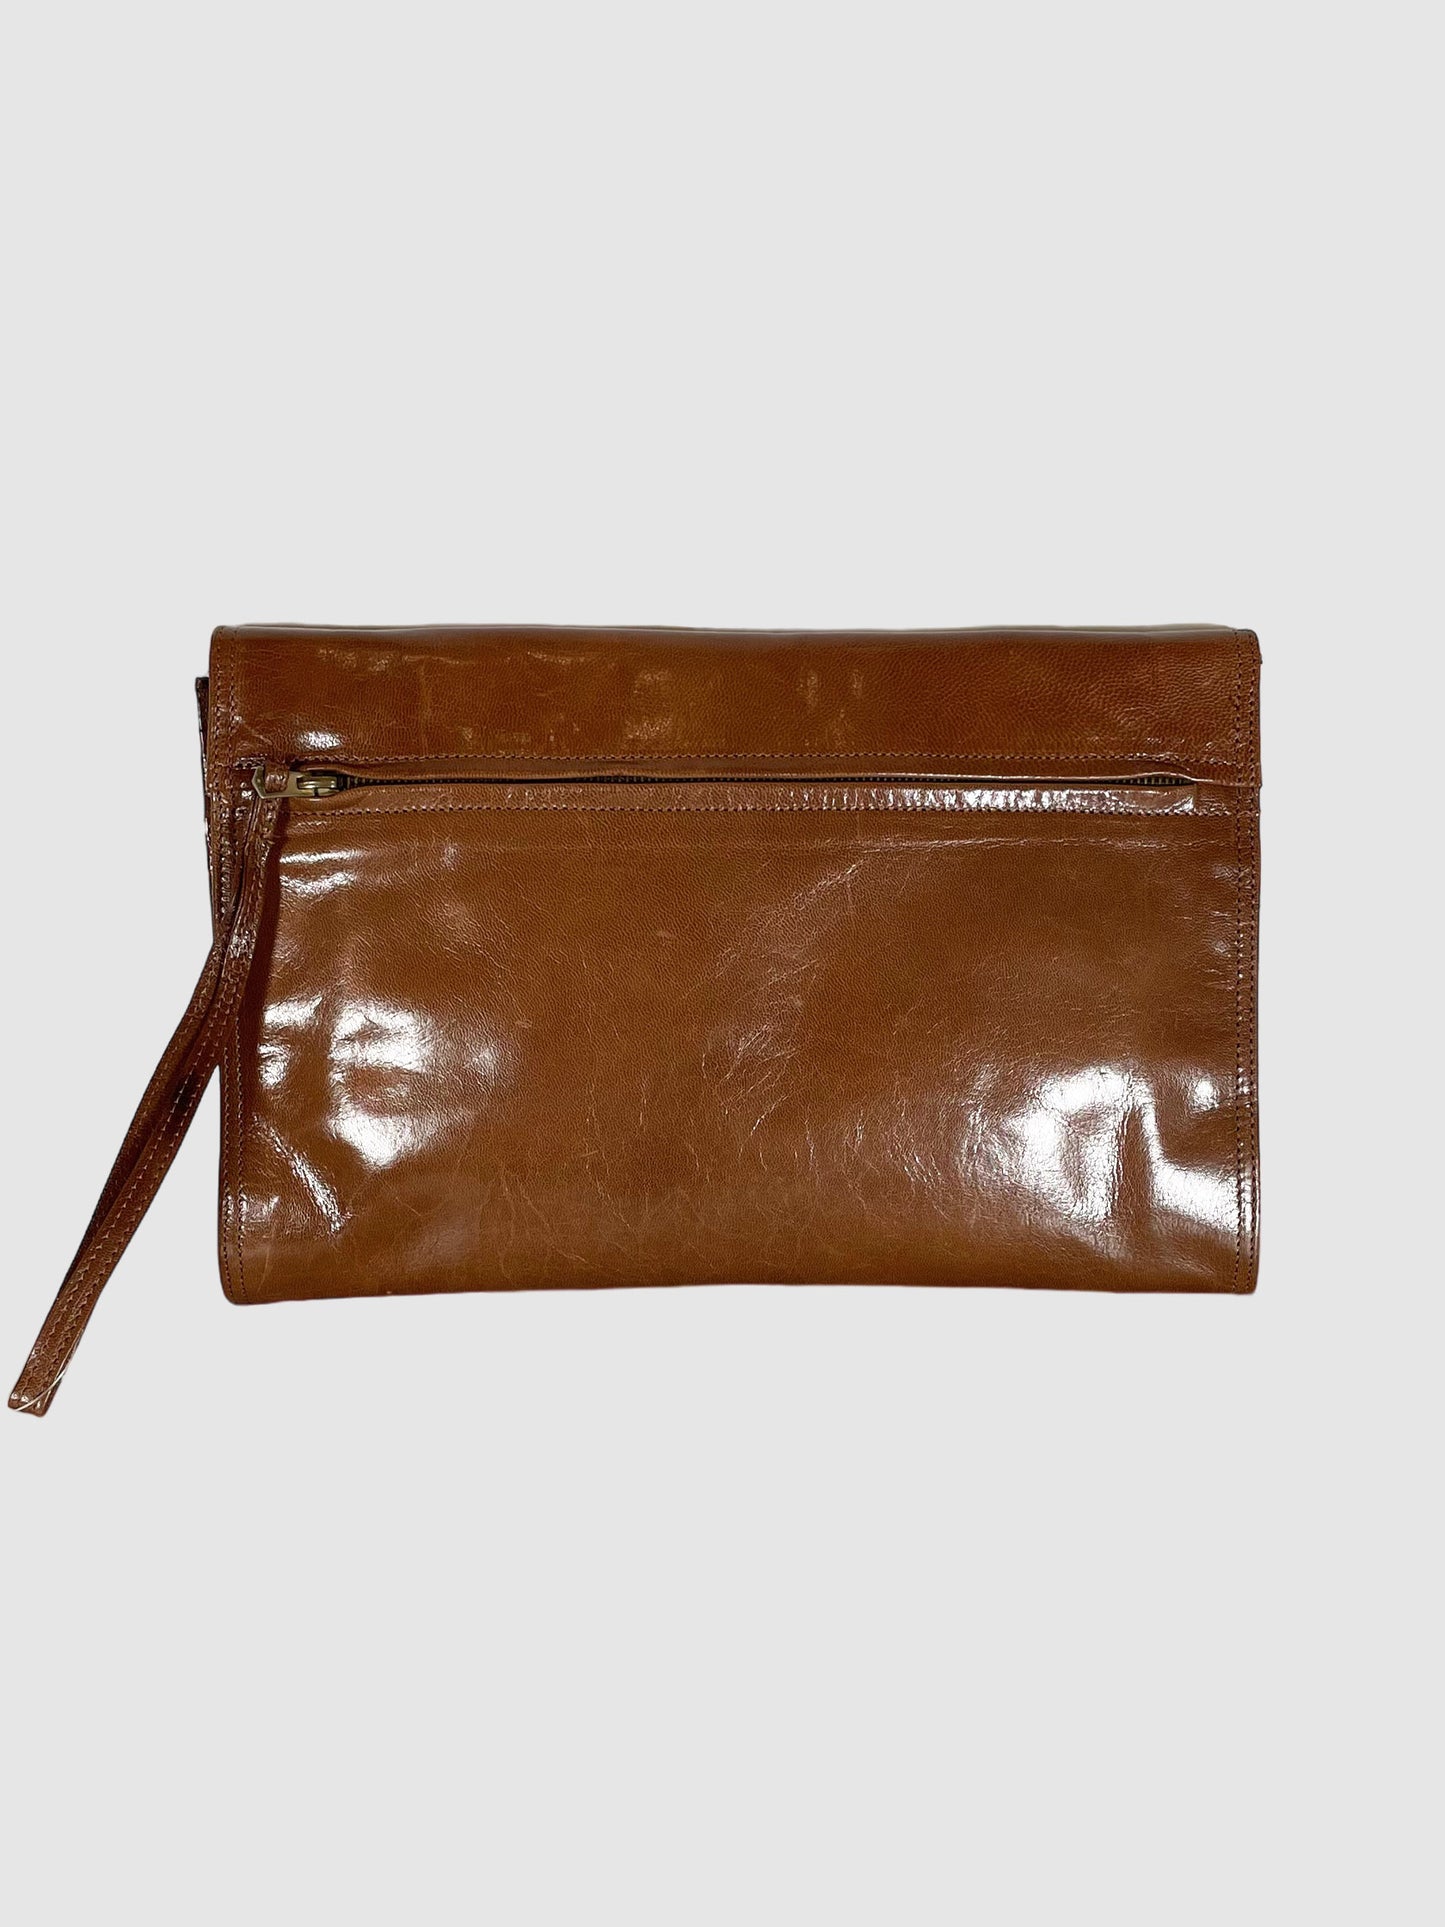 Leather Clutch with Wristlet